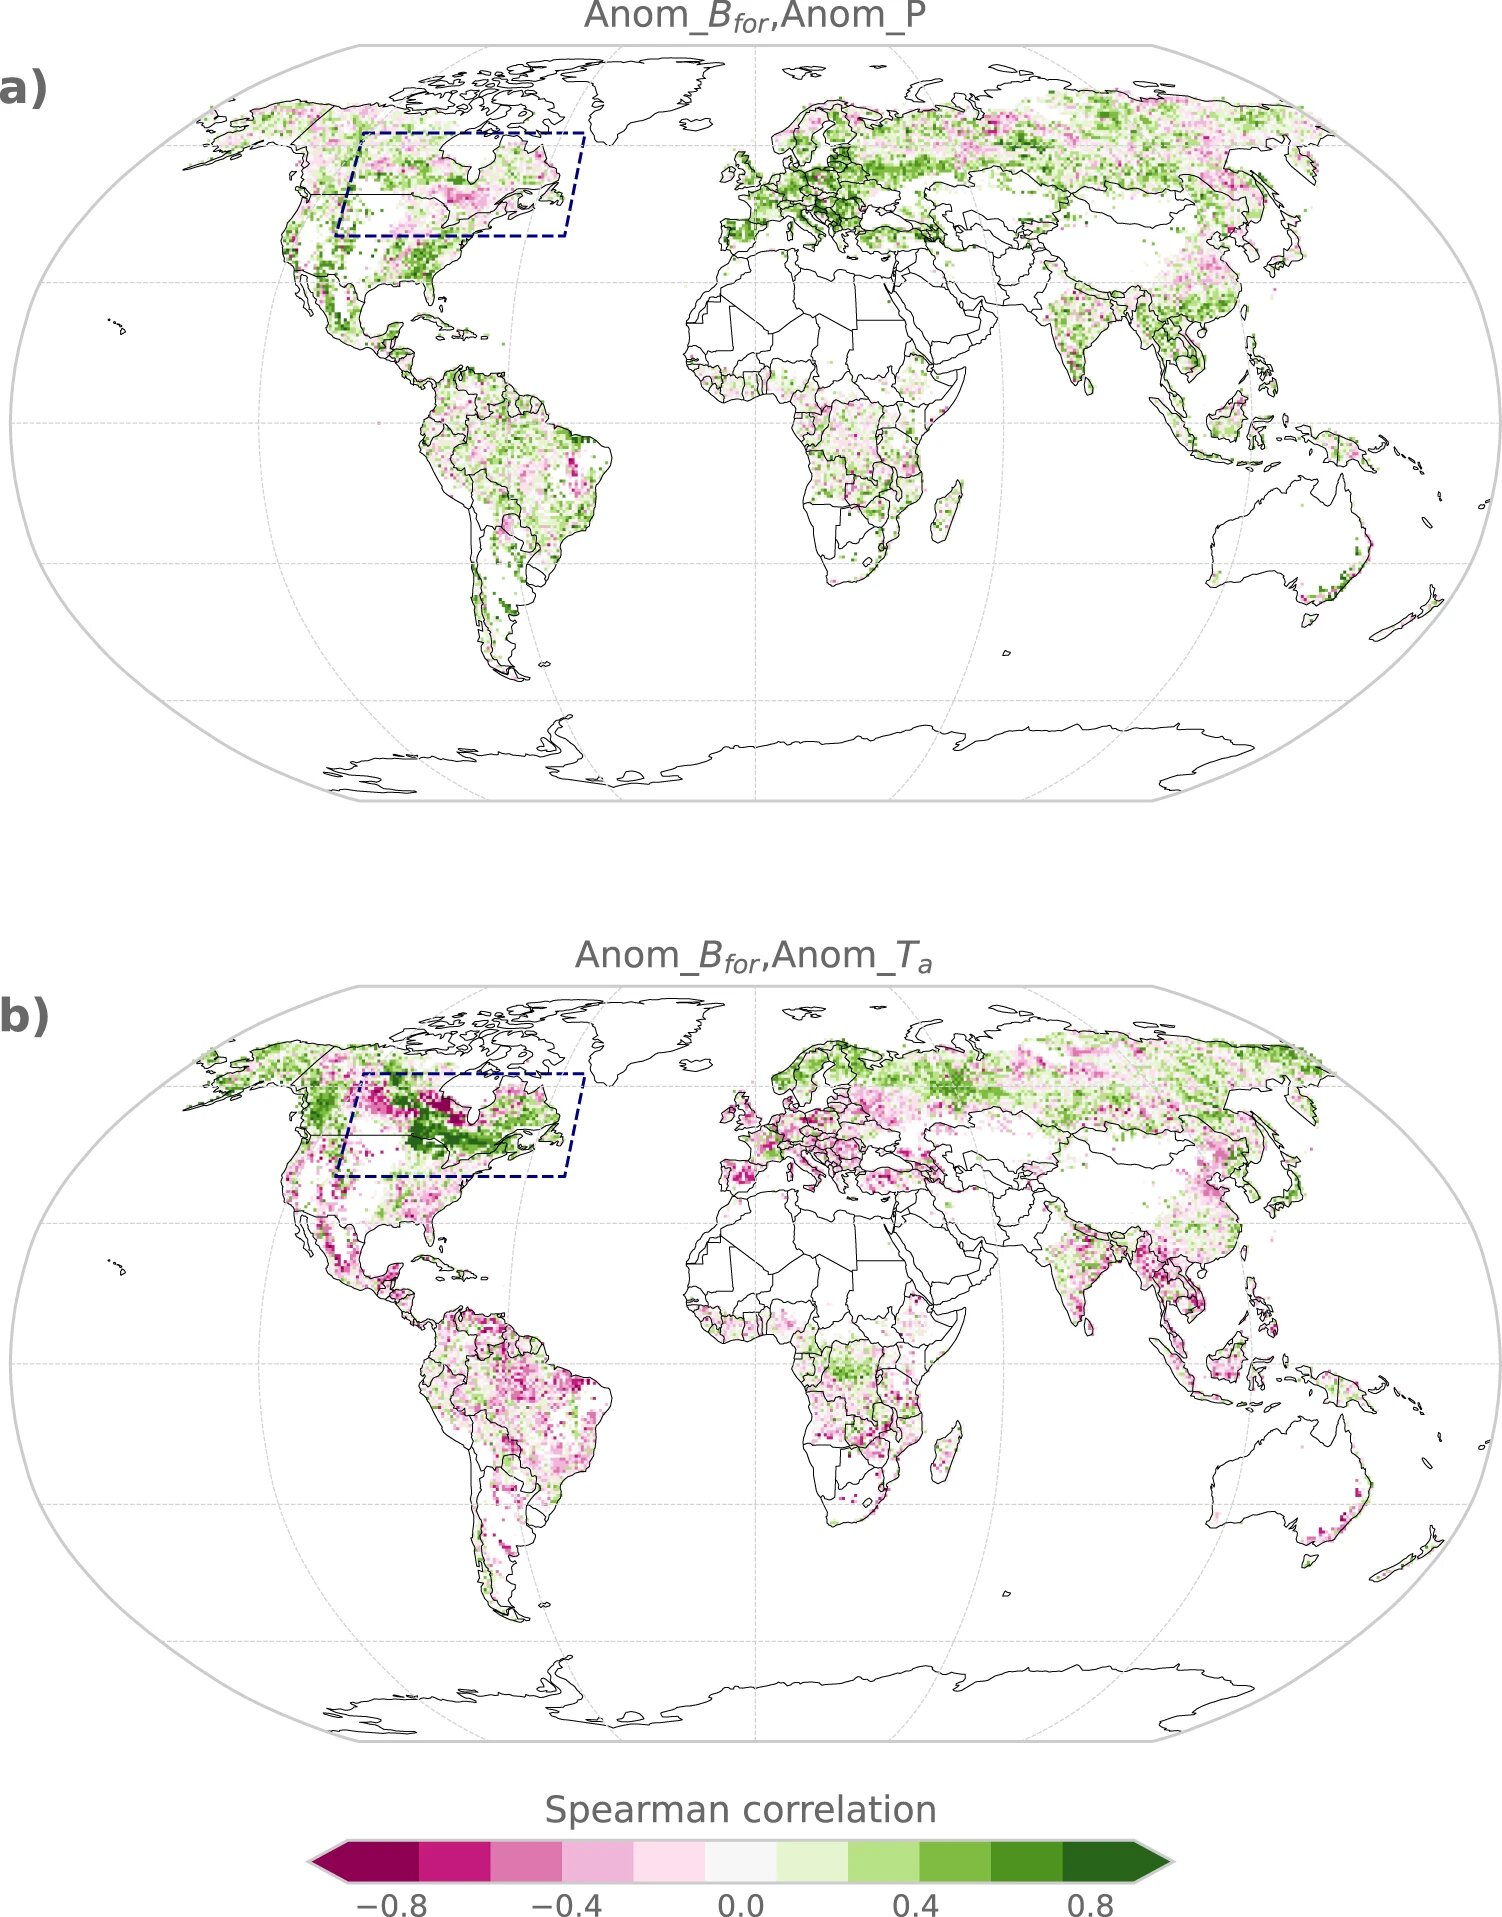 New method makes it possible to assess the direct effects of human land use on the carbon cycle